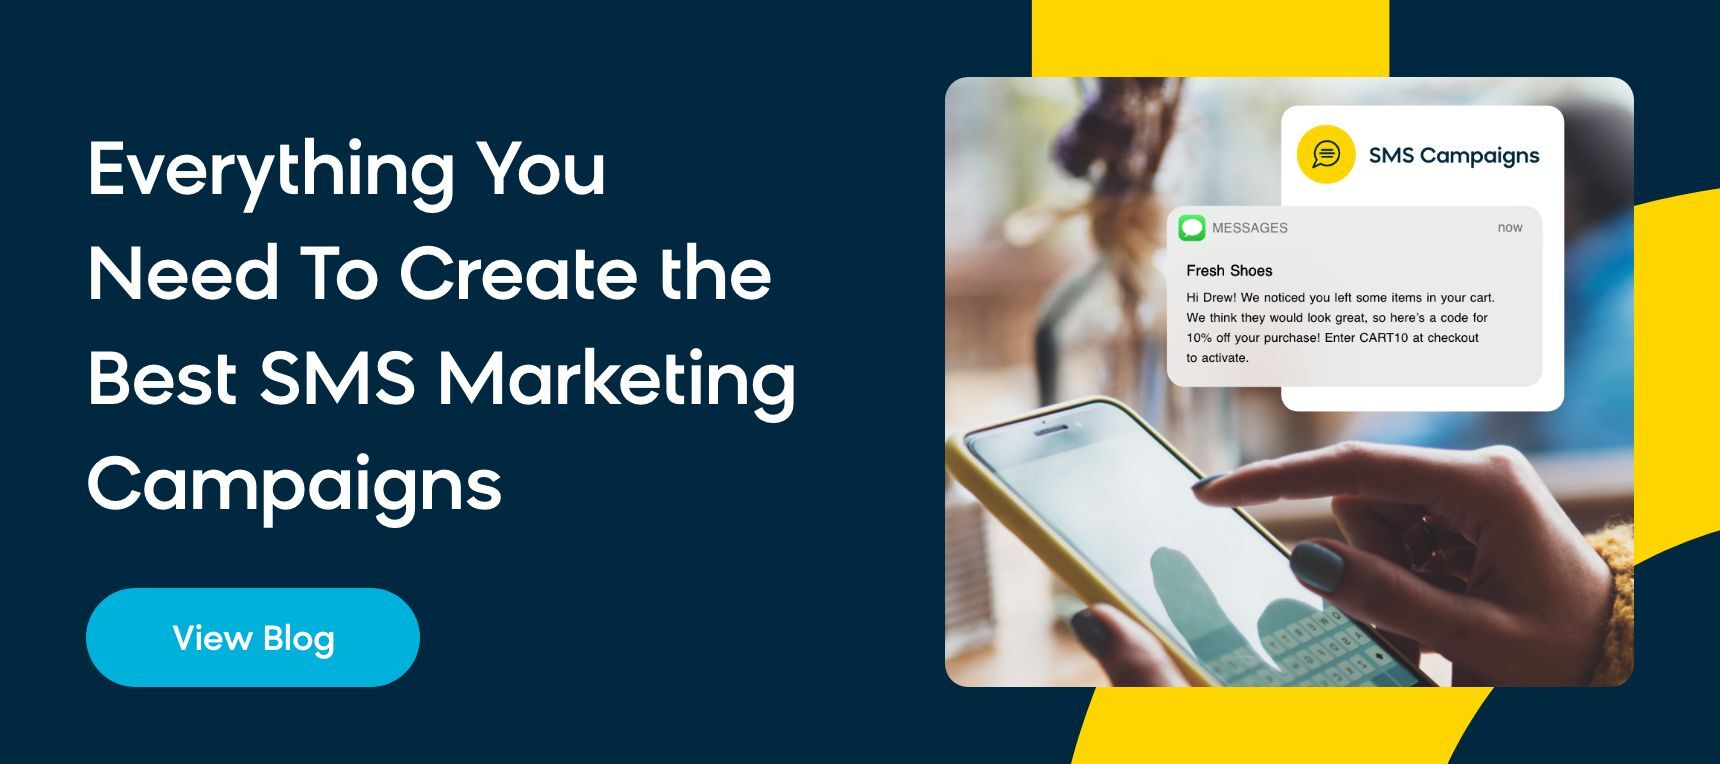 Everything you need to create the best SMS marketing campaigns